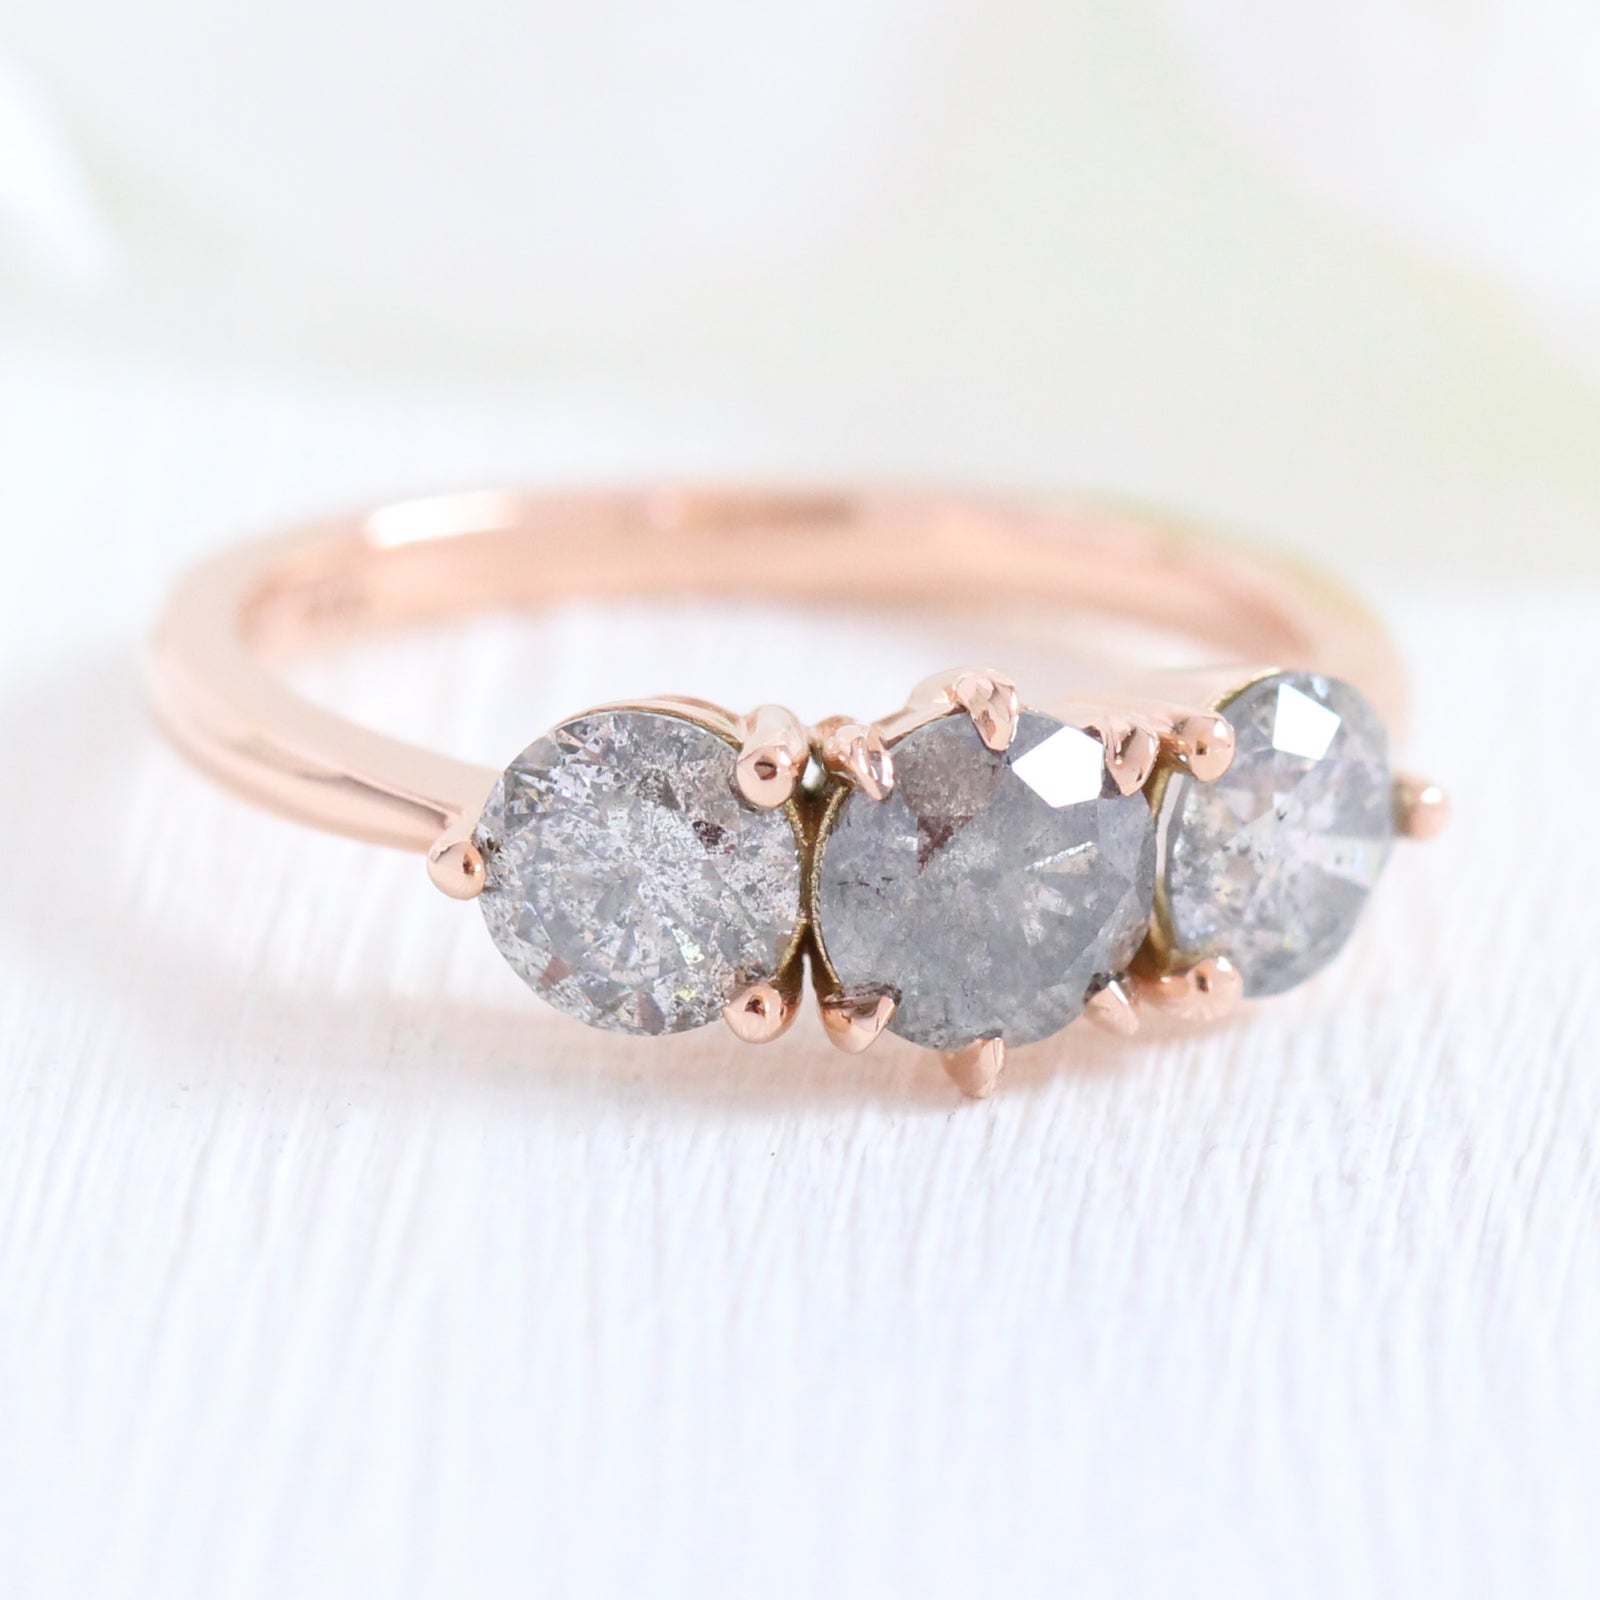 Large Salt and Pepper Grey Diamond Engagement Ring in Rose Gold 3 Stone Diamond Ring by La More Design Jewelry